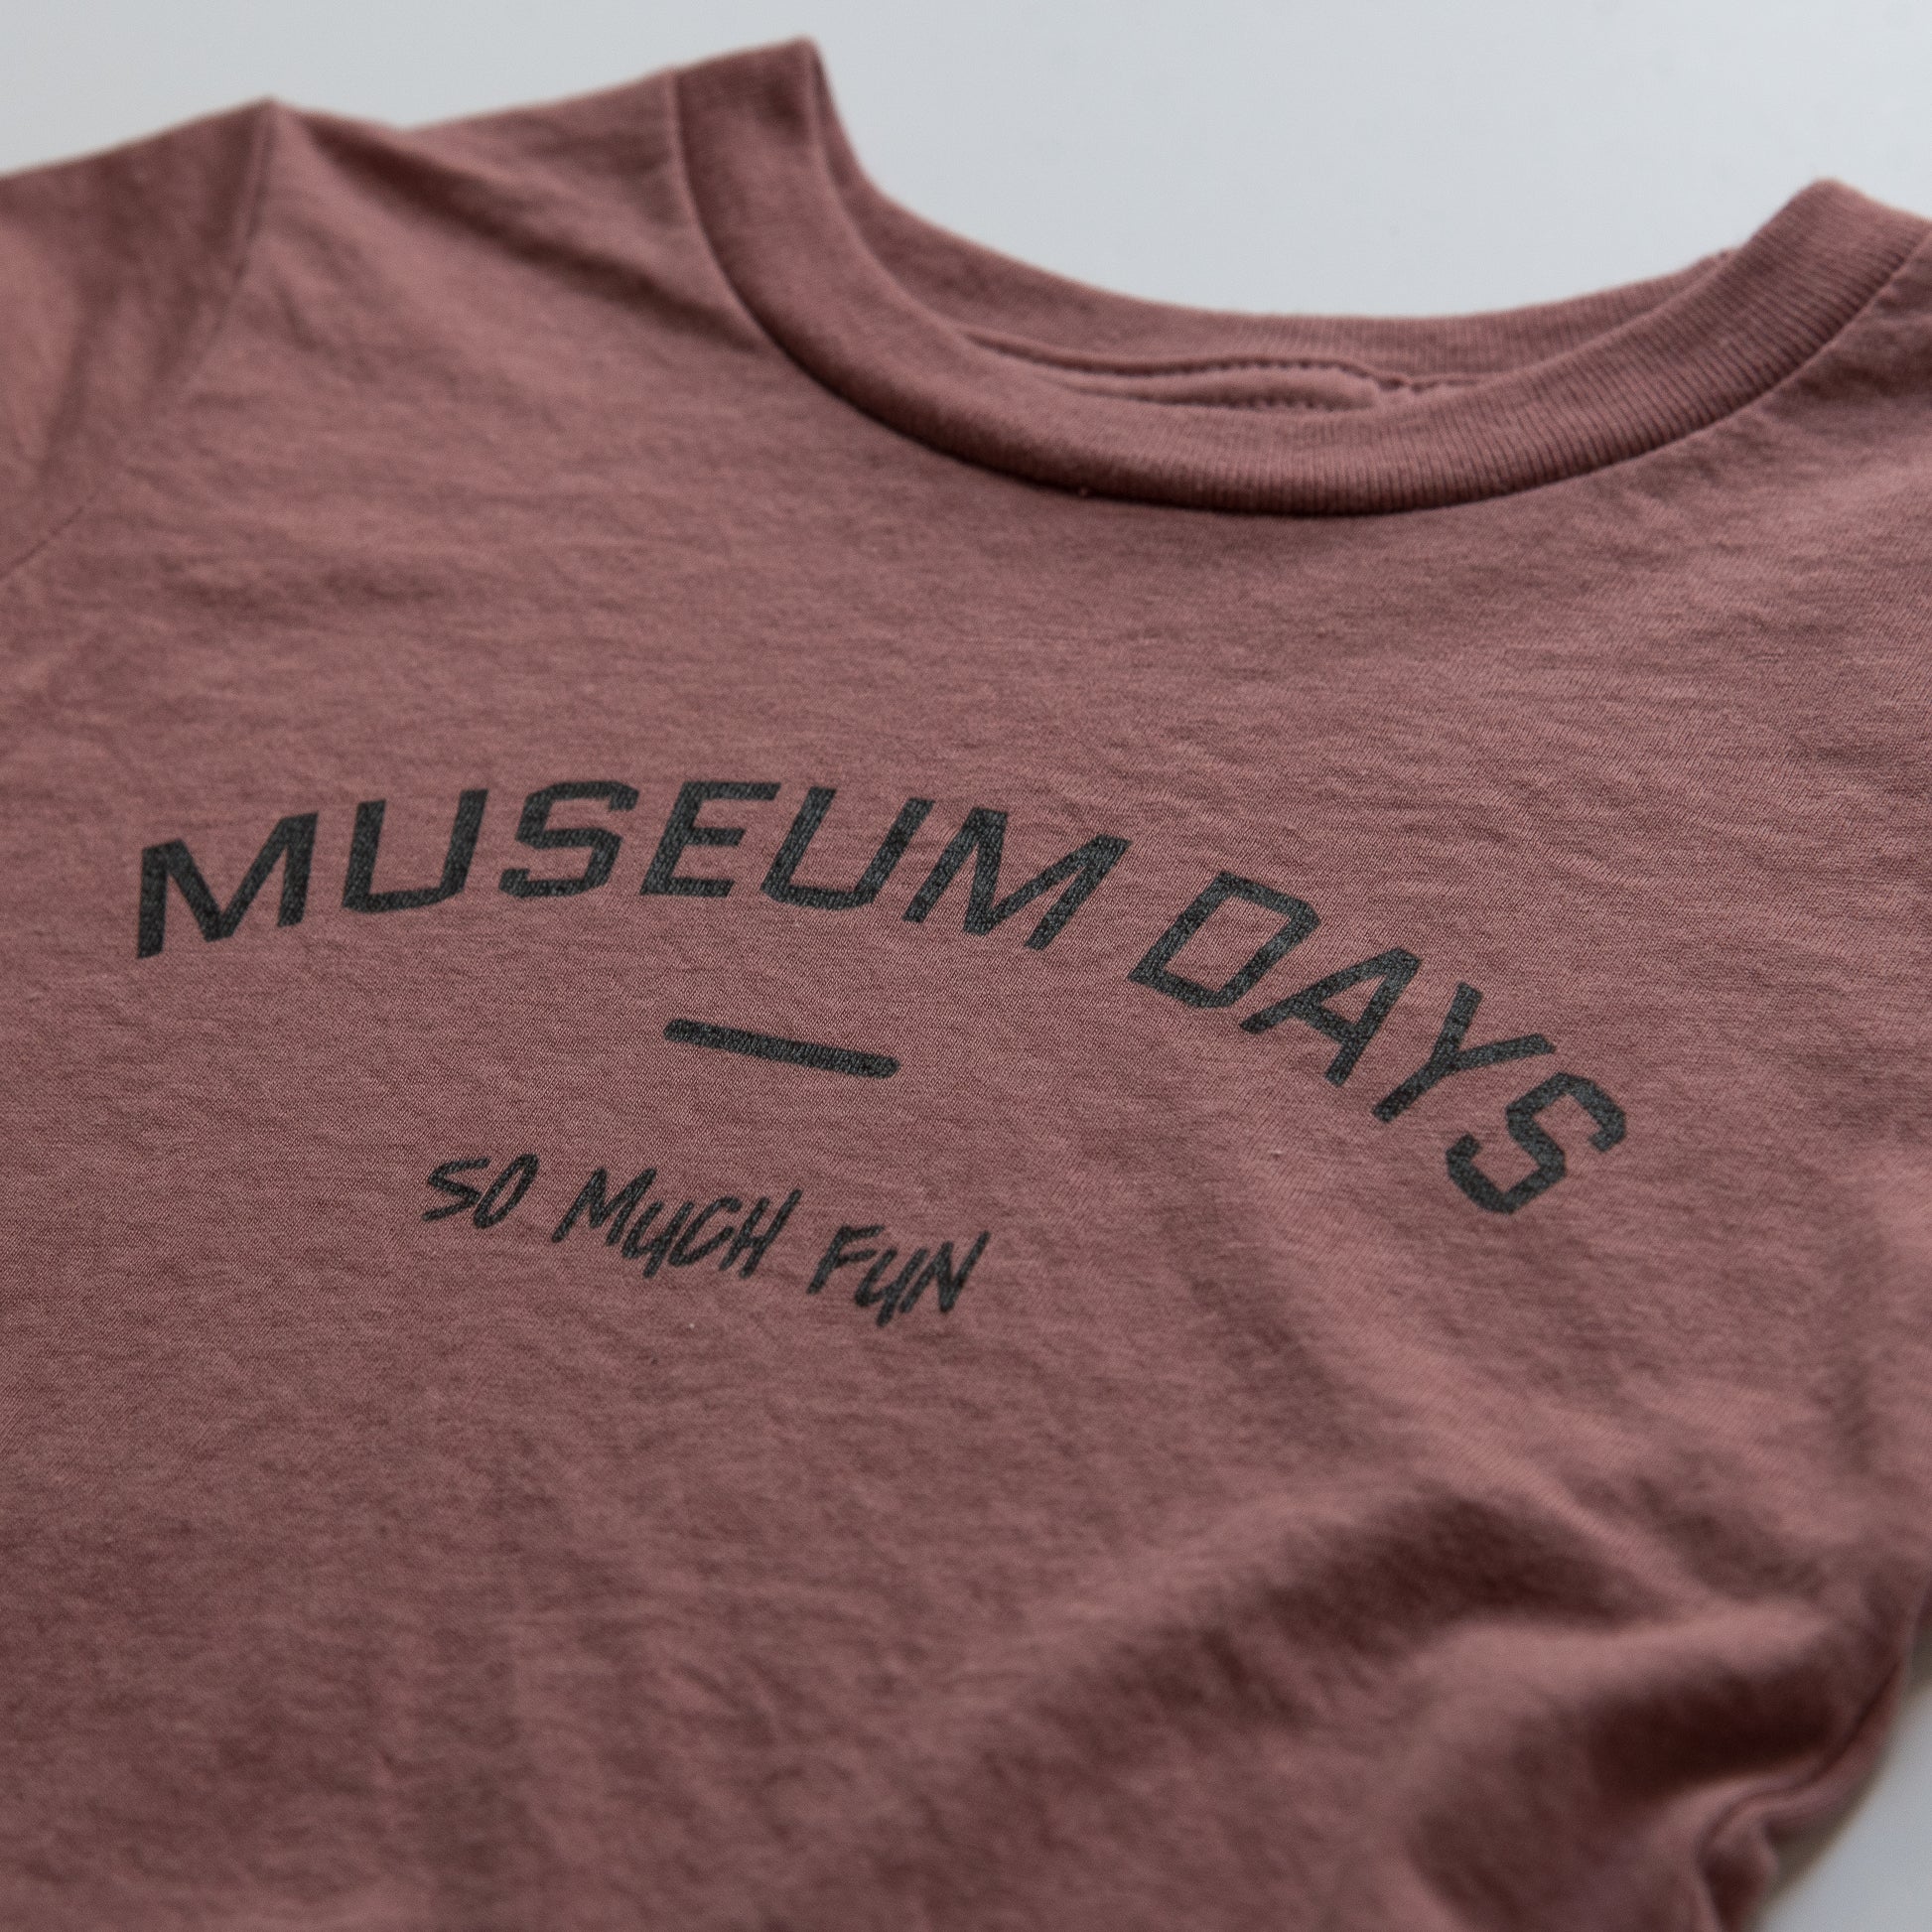 MUSEUM DAYS SO MUCH FUN - Short Sleeve Baby Tee - 3 COLORS! - Little Mate Adventures 